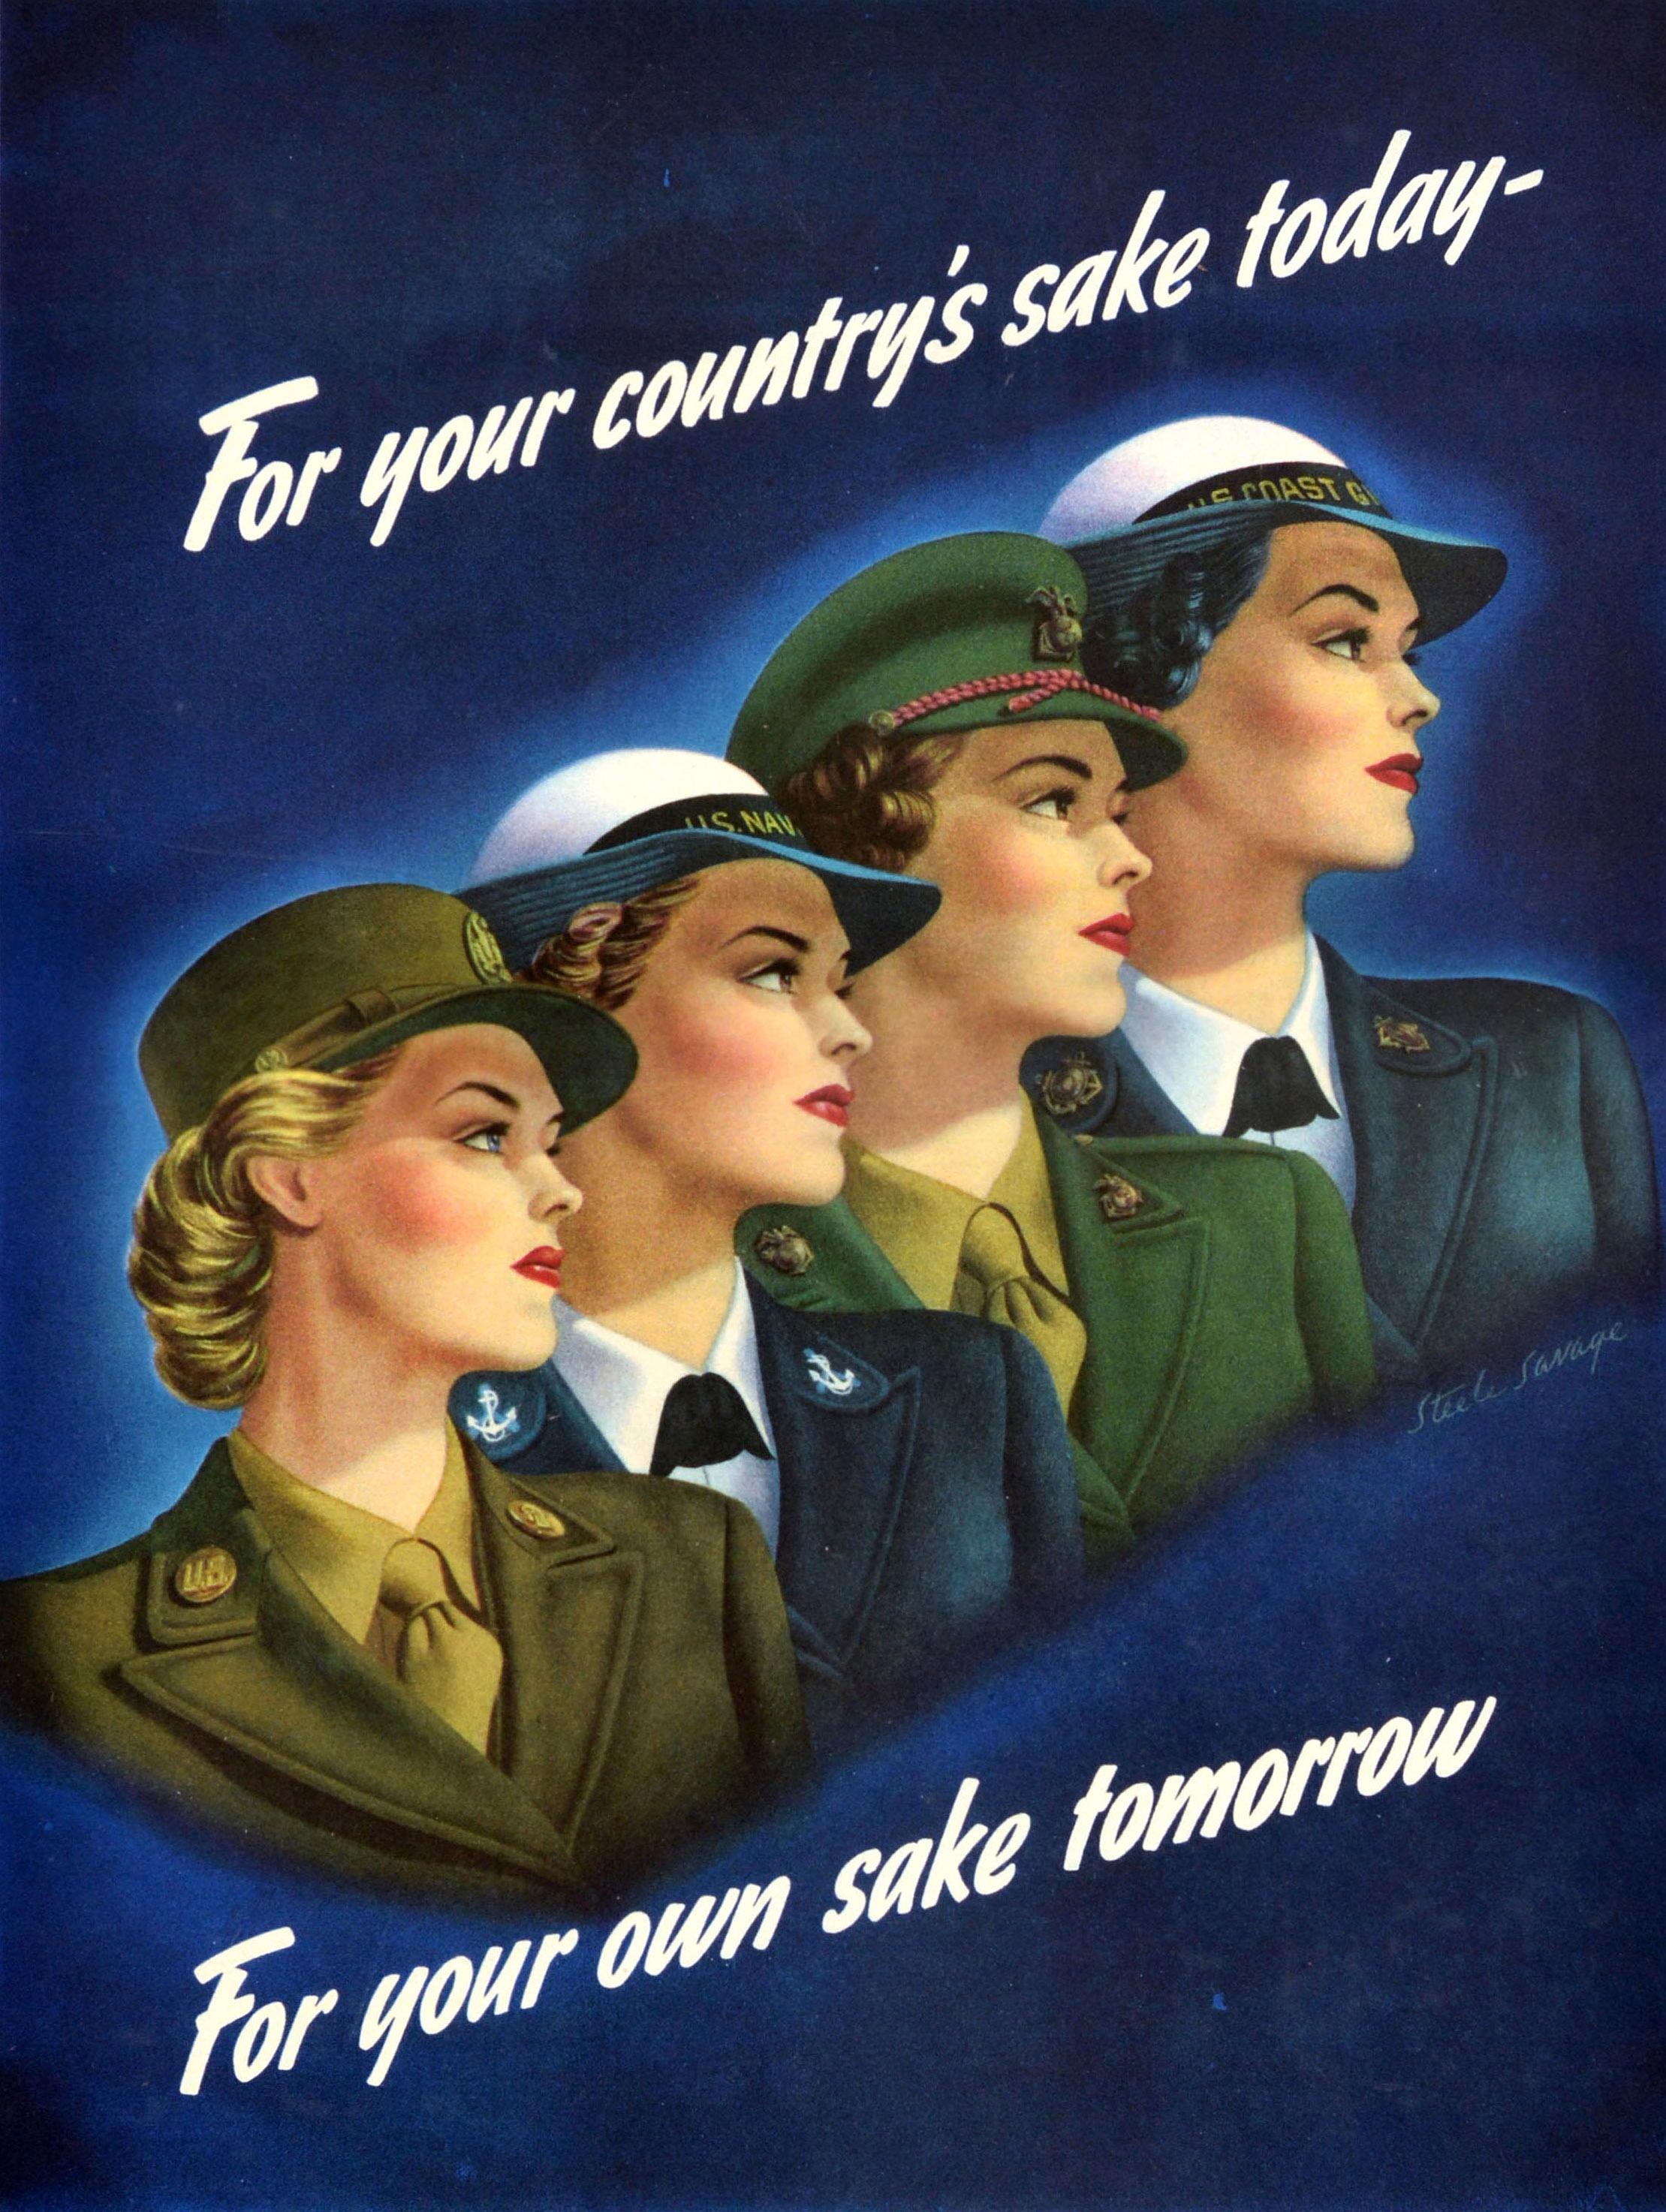 Affiche de recrutement américaine originale de la Seconde Guerre mondiale - For your country's sake today For your own sake tomorrow Go to the nearest recruiting station of the armed service of your choice - comportant une superbe illustration de